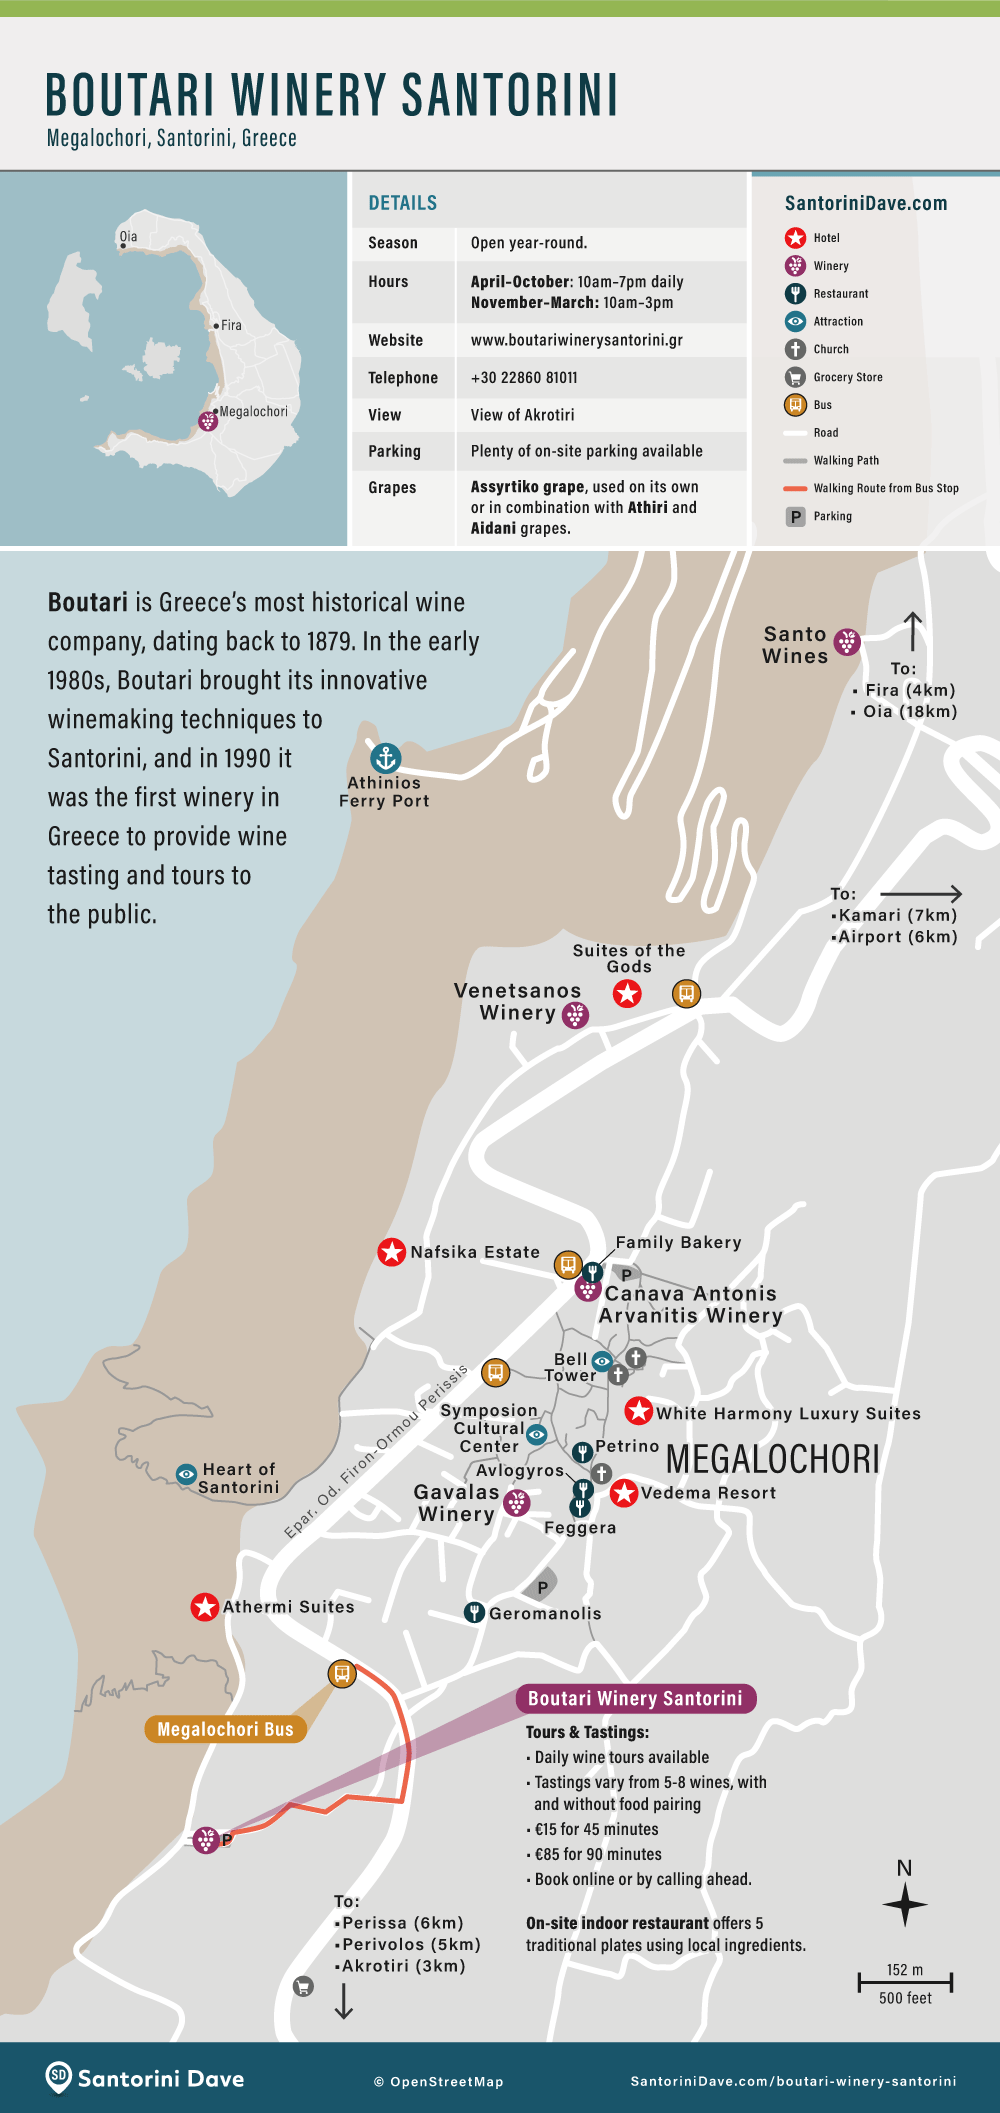 Map showing the location and surrounding hotels and attractions of Boutari Winery in Santorini